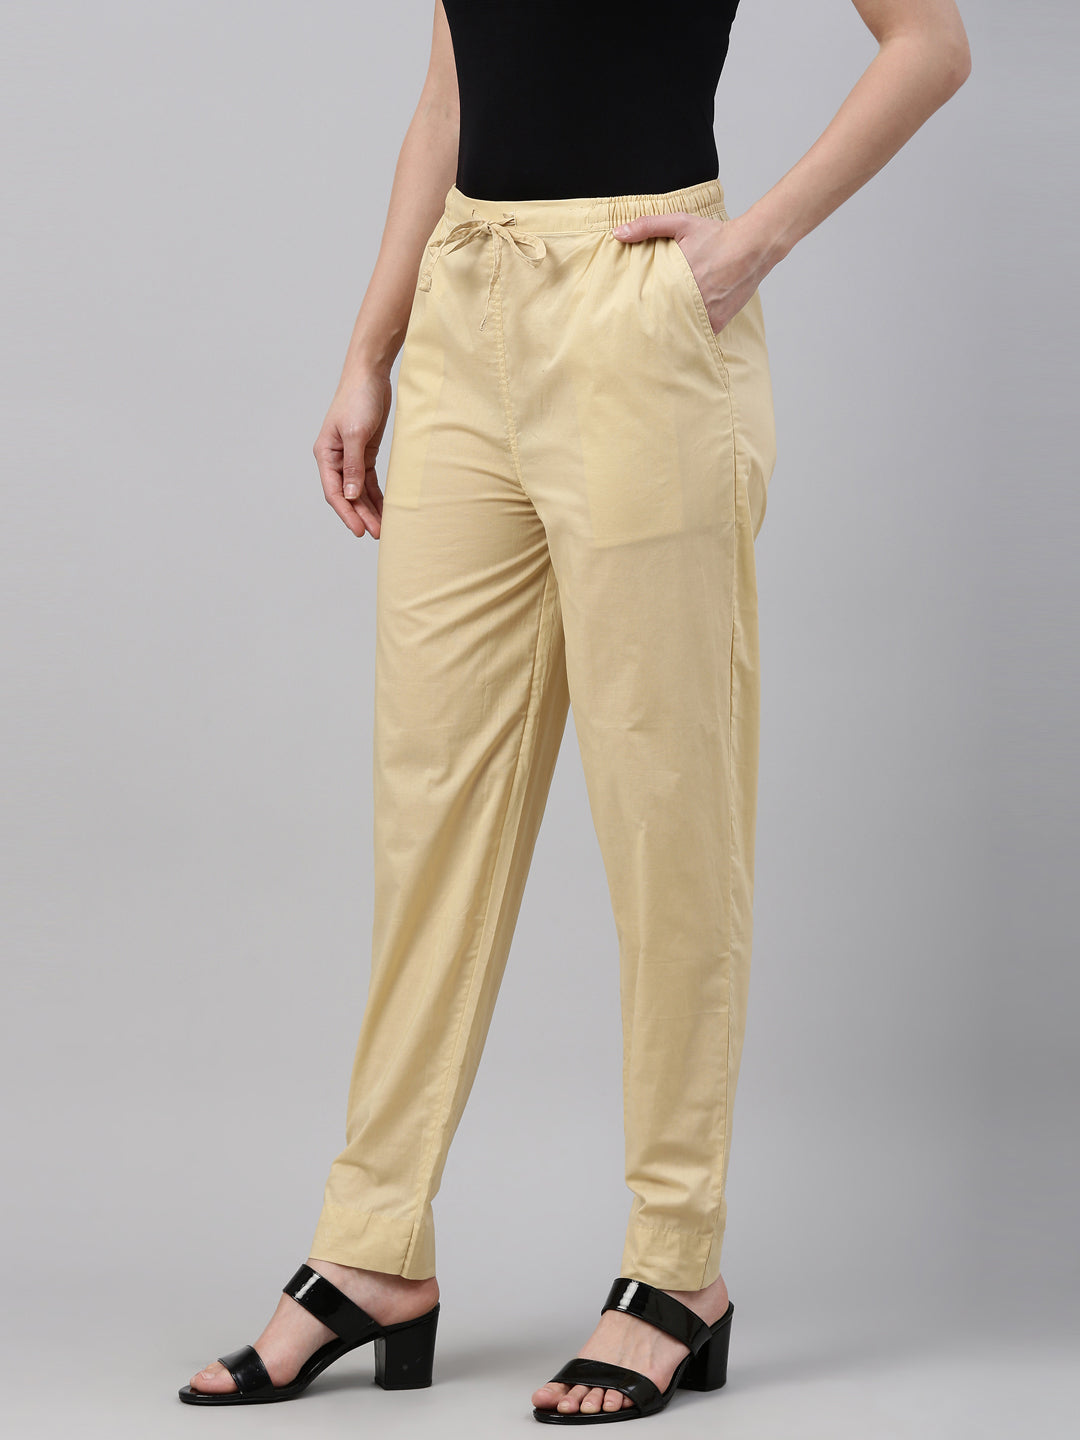 Mixed Creams — MODEDAMOUR | Cream trousers outfit, Fashion capsule  wardrobe, Trouser outfits